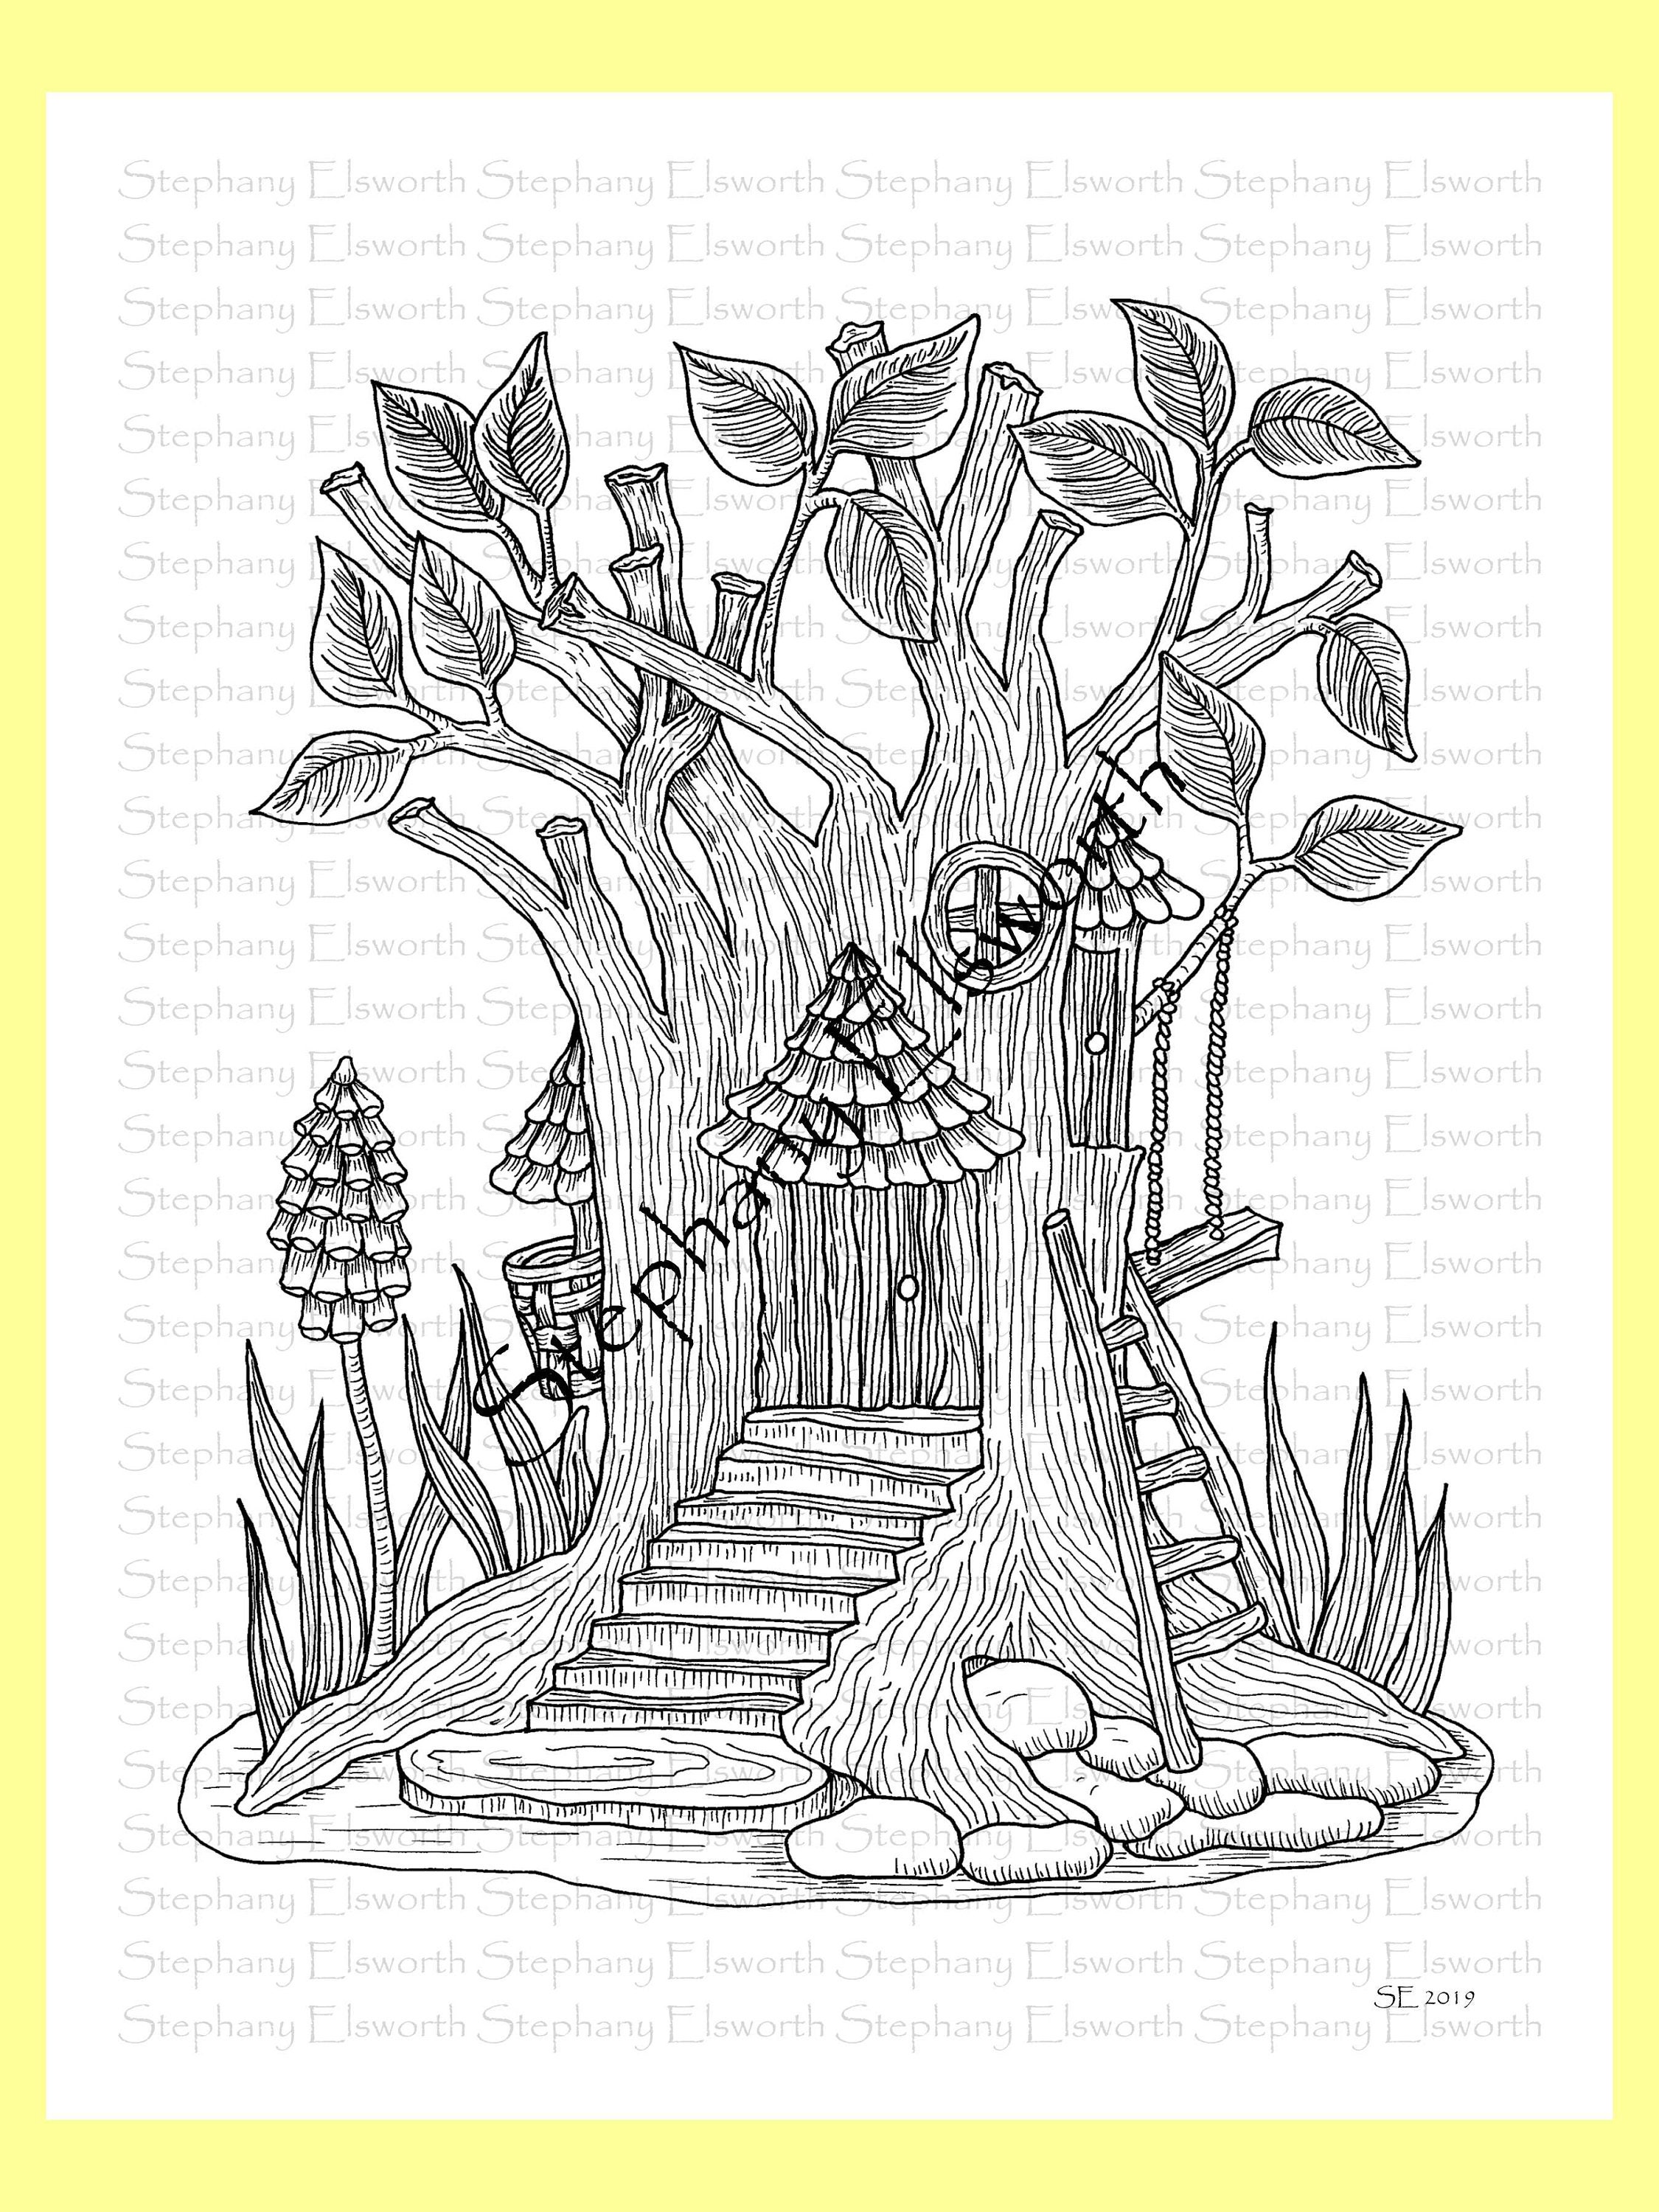 tree trunk coloring page